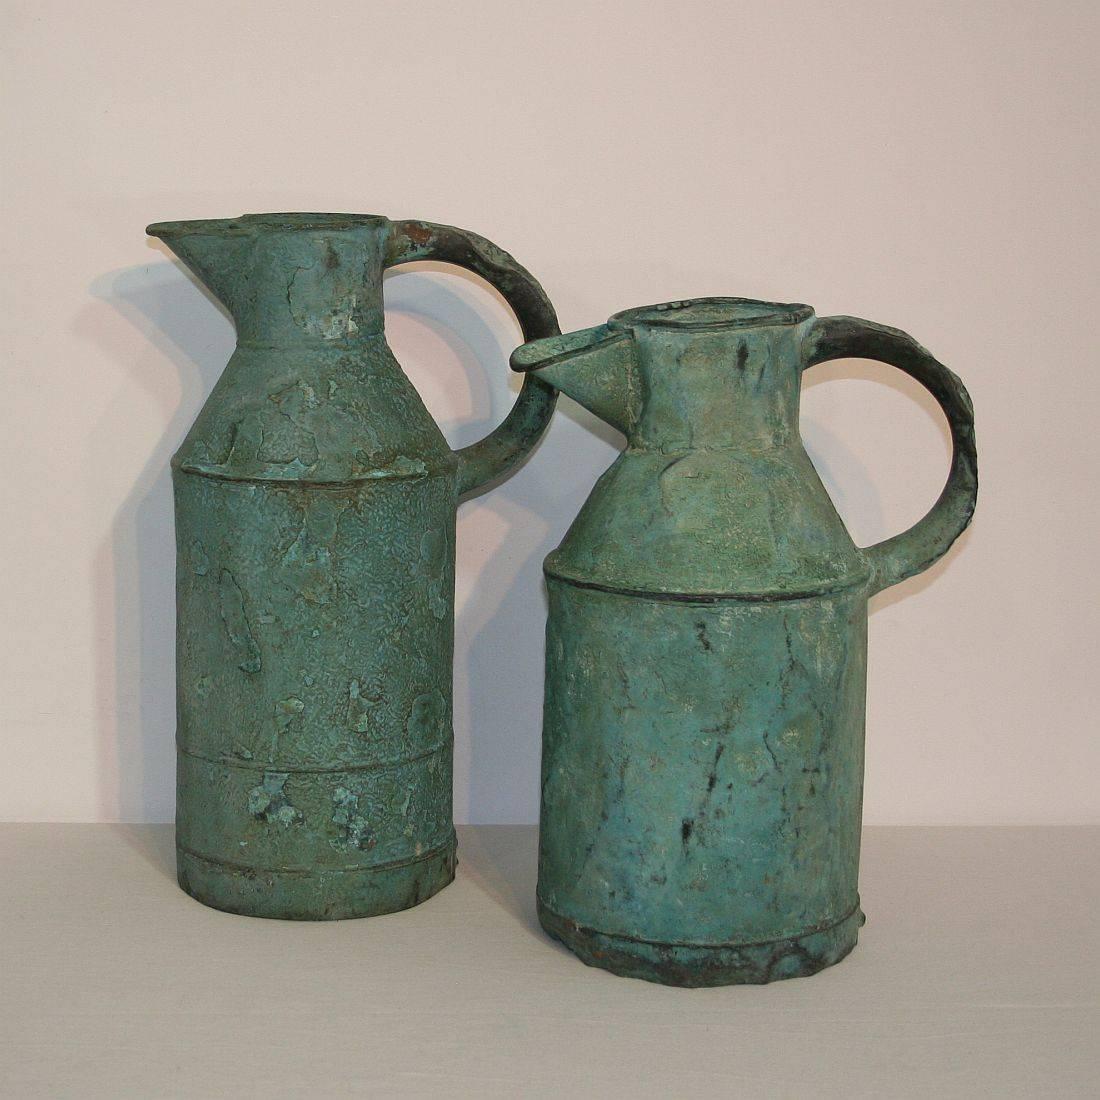 Stunning copper water jugs with great patina. France, circa 1850-1900. Weathered.